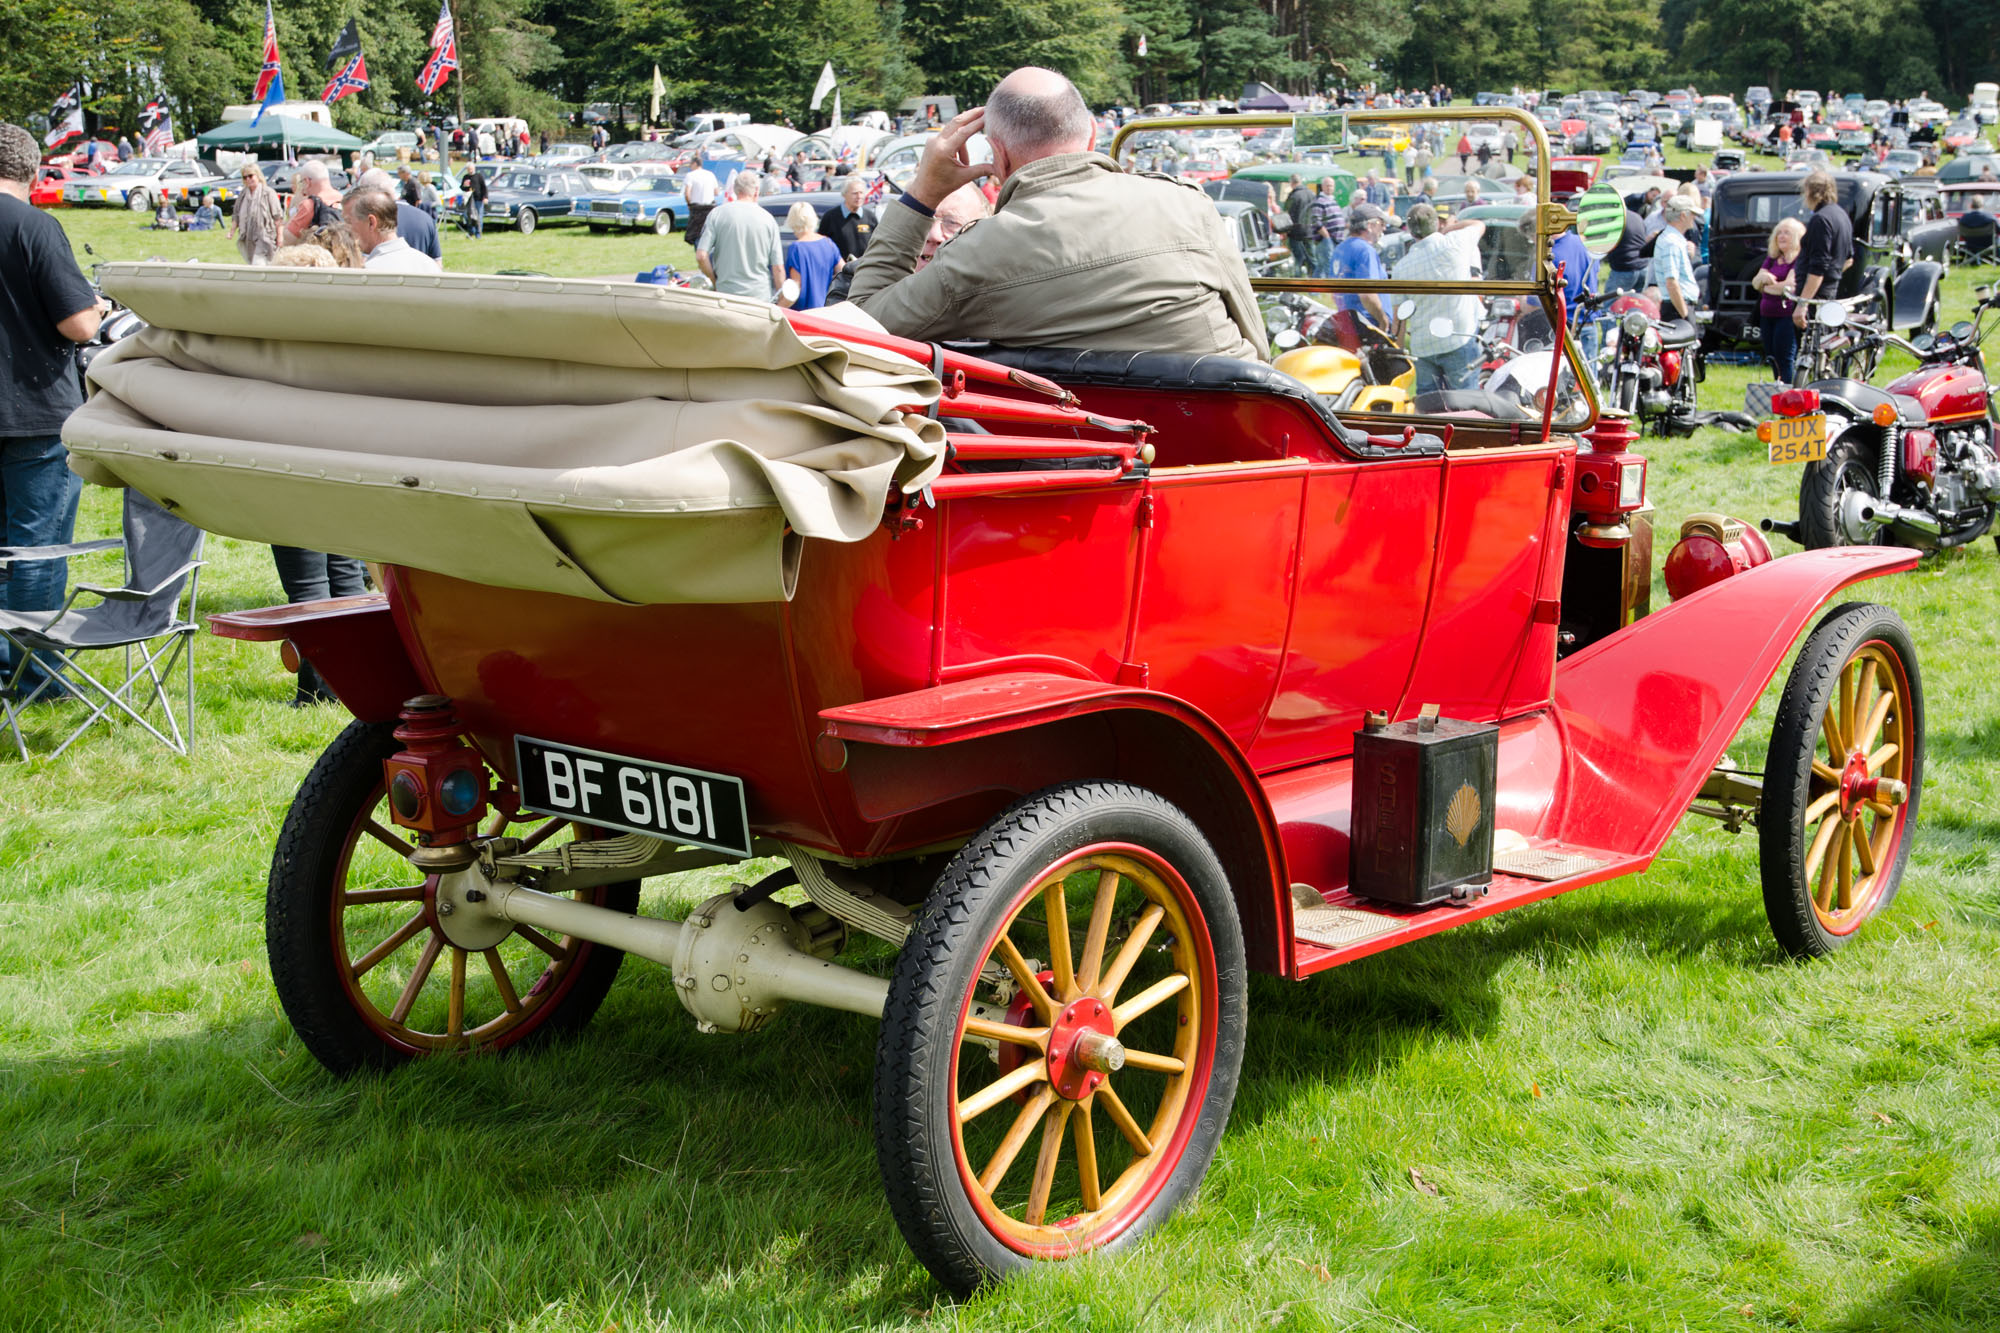 an antique car is on display at an outdoor rally